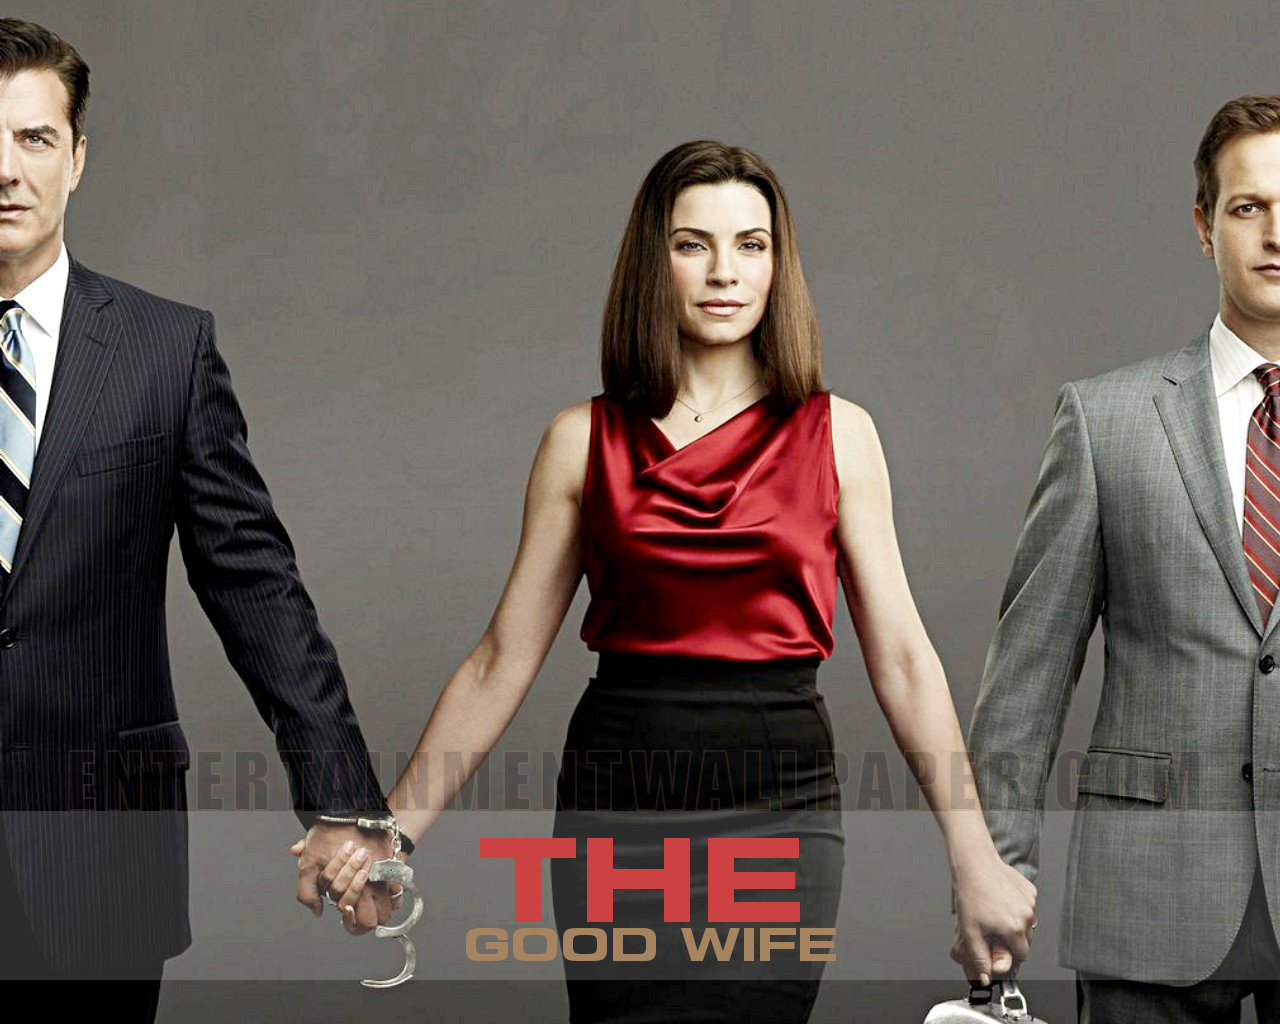 The-Good-Wife-Wallpaper-the-good-wife-24455142-1280-1024.jpg